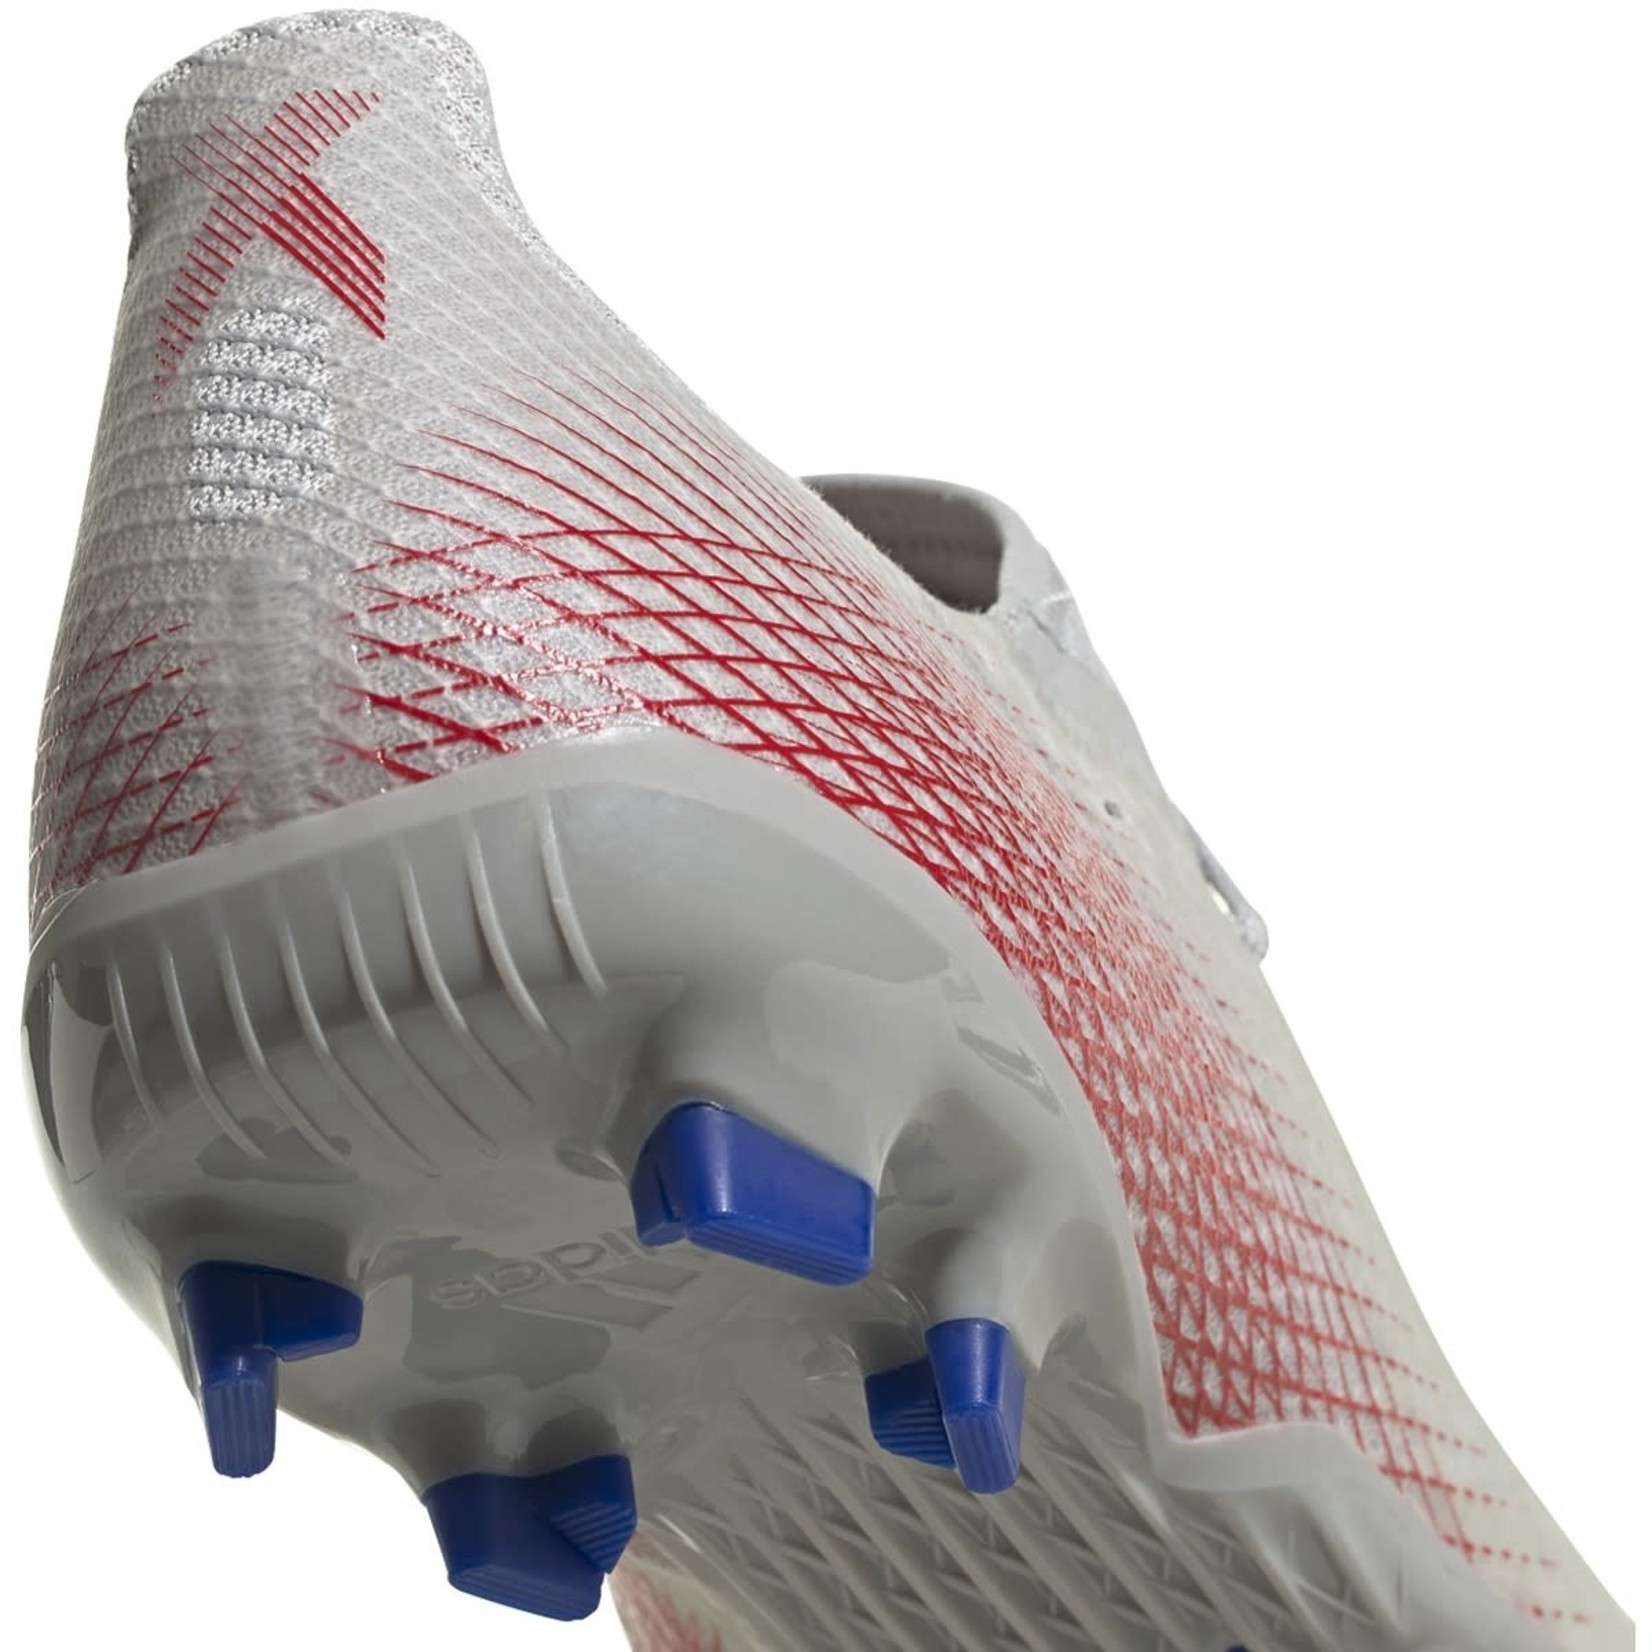 ADIDAS X GHOSTED.3 FG (SILVER/RED/BLUE)